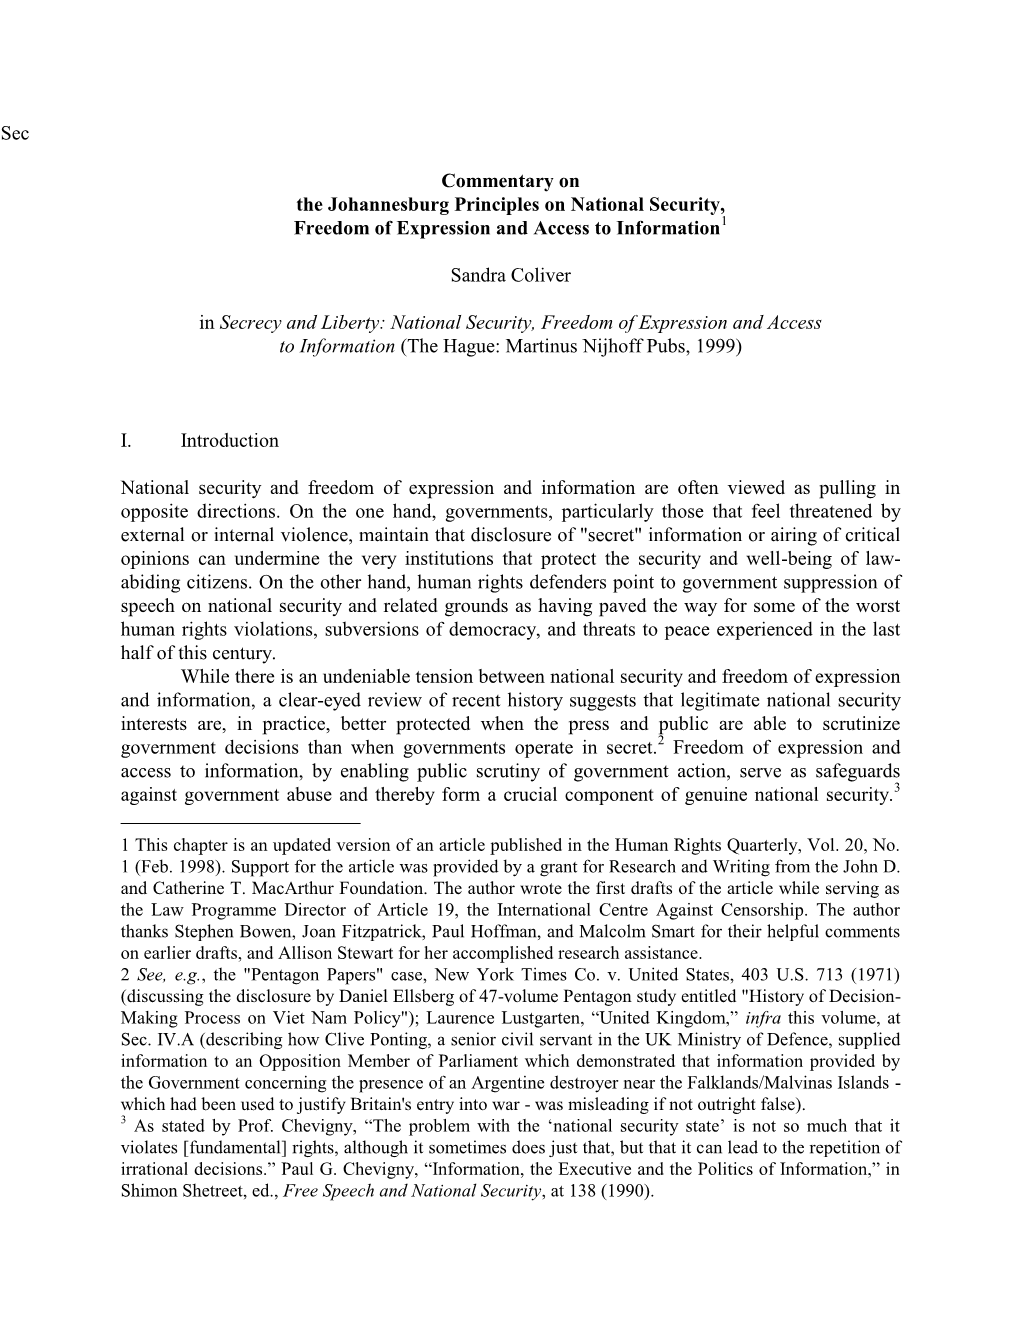 Commentary on the Johannesburg Principles on National Security, Freedom of Expression and Access to Information1